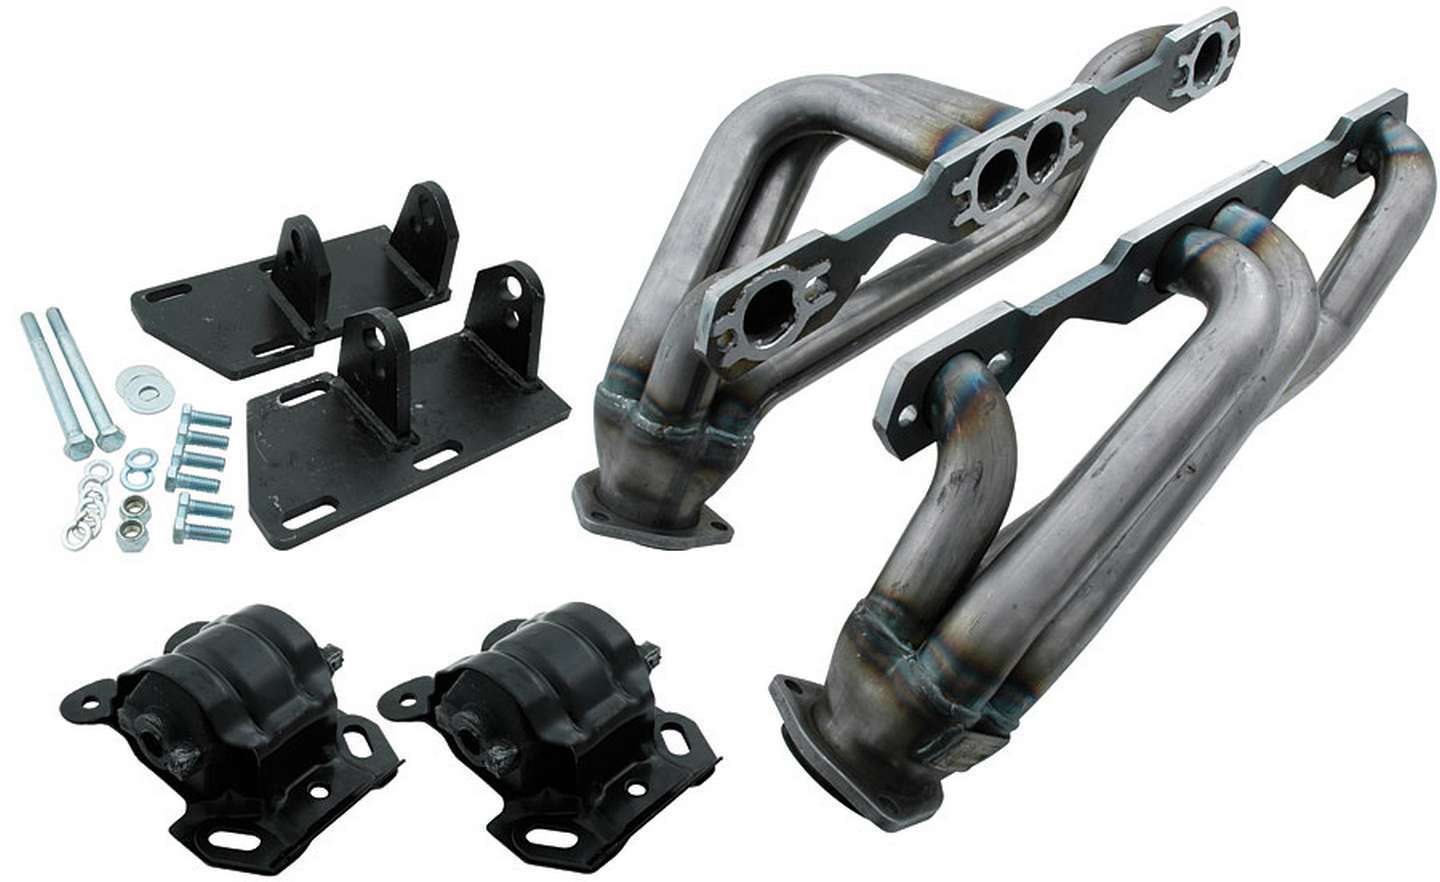 Allstar Performance 38250 Engine Conversion Kit, Headers / Mounts, Small Block Chevy, GM S-10 2WD 1982-2002, Kit